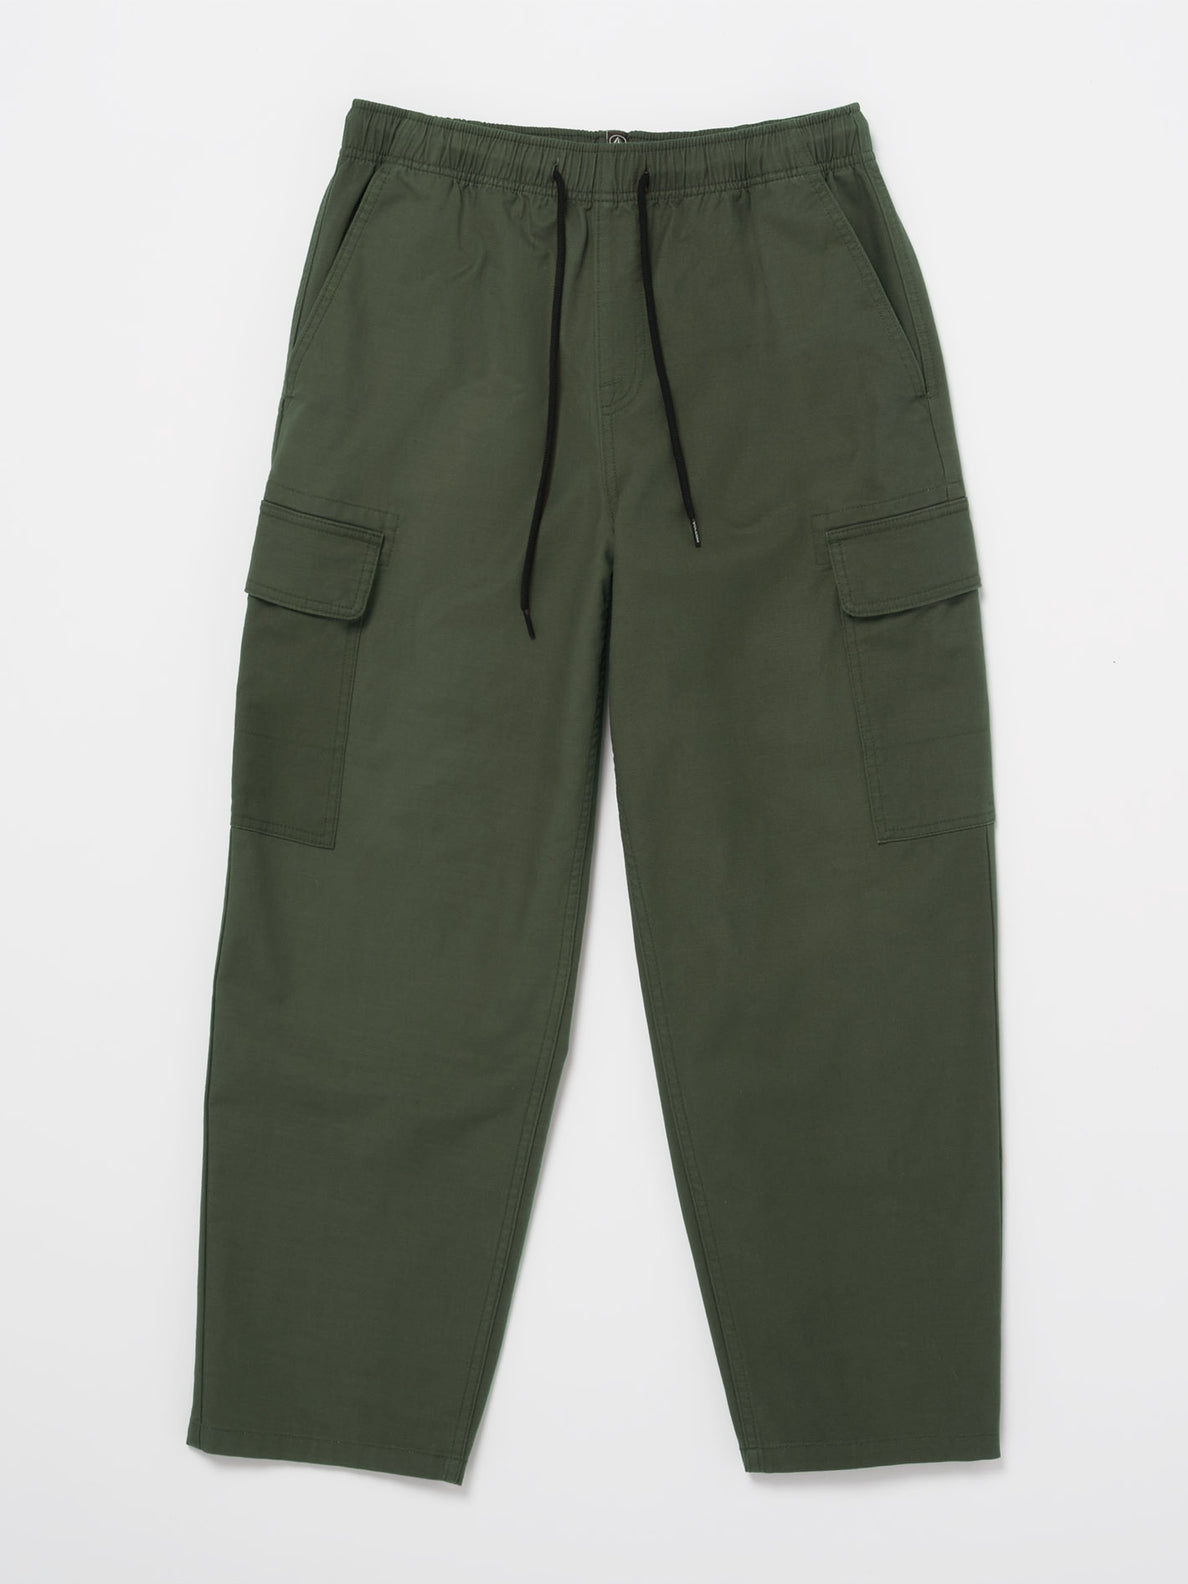 Billow Tapered Elastic Waist Cargo Pant - Squadron Green